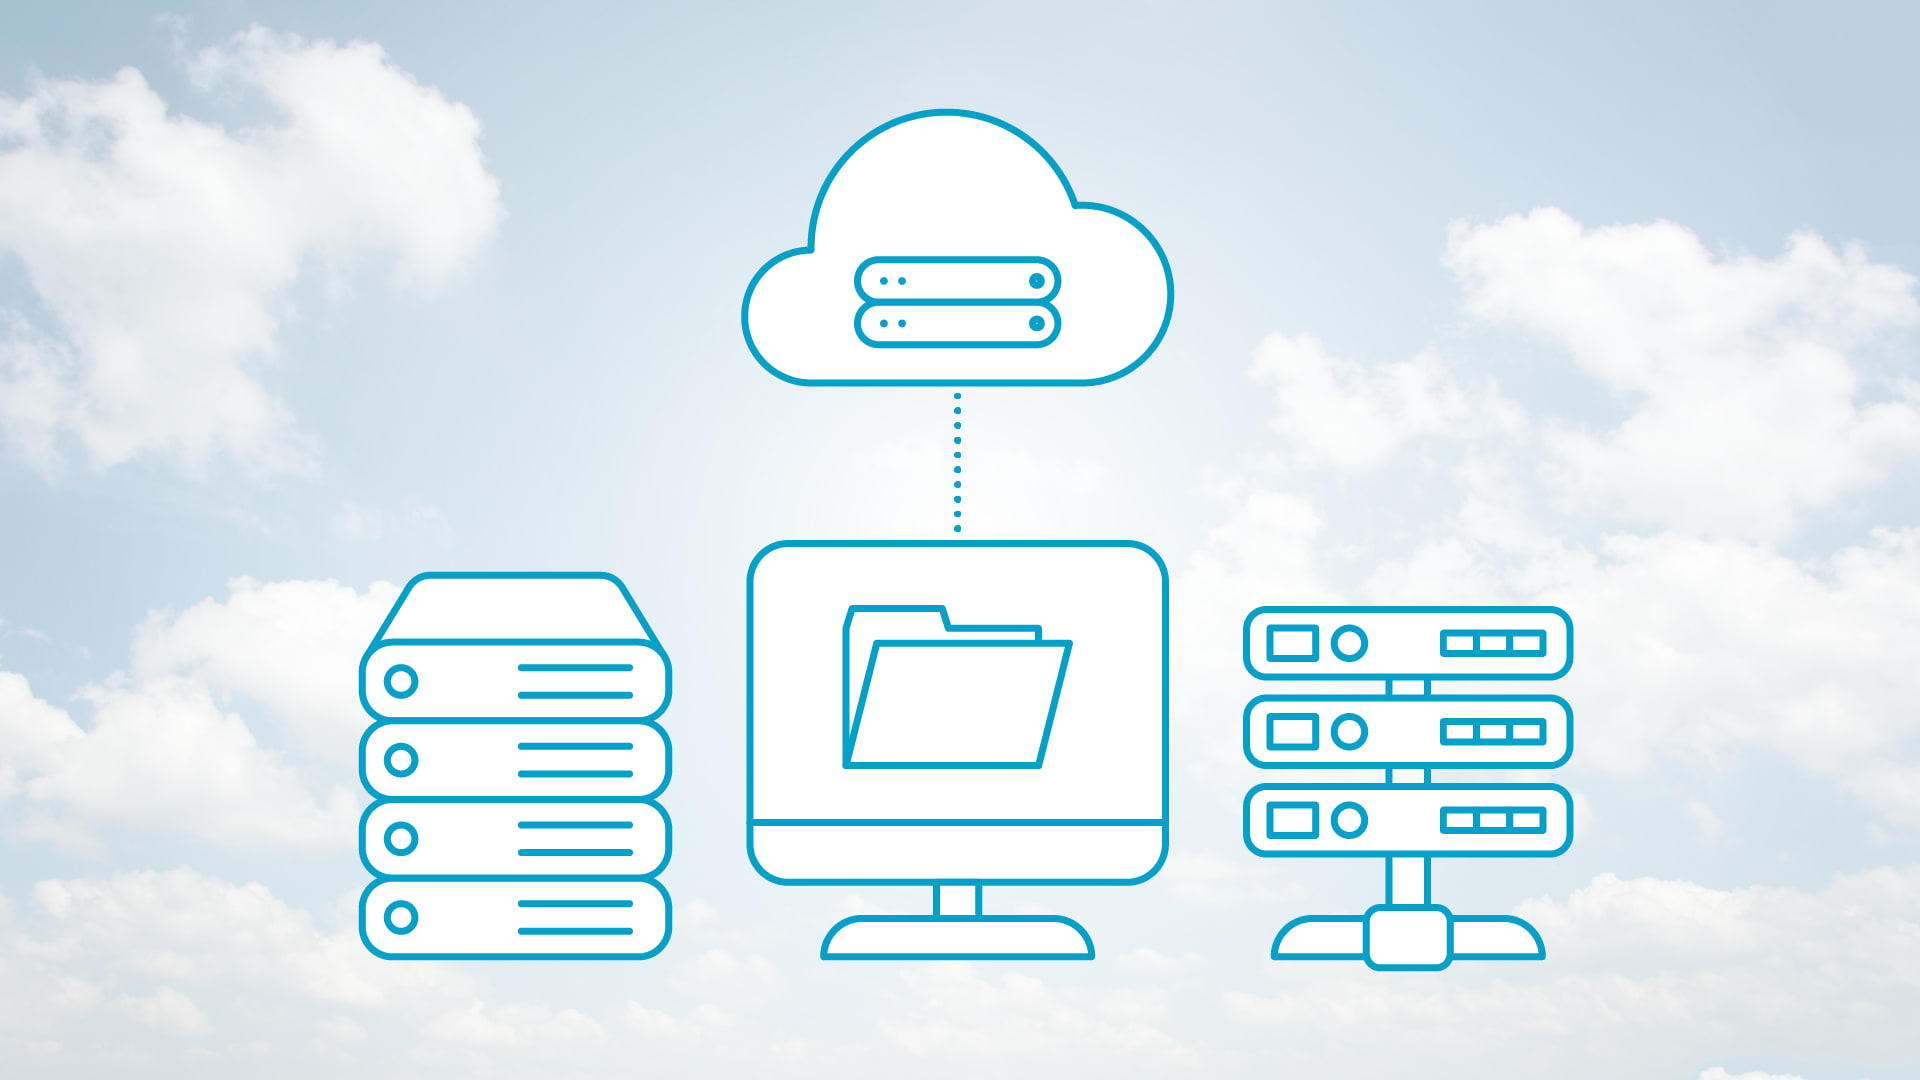 Best practices for cloud backups include testing your backups and staff training.